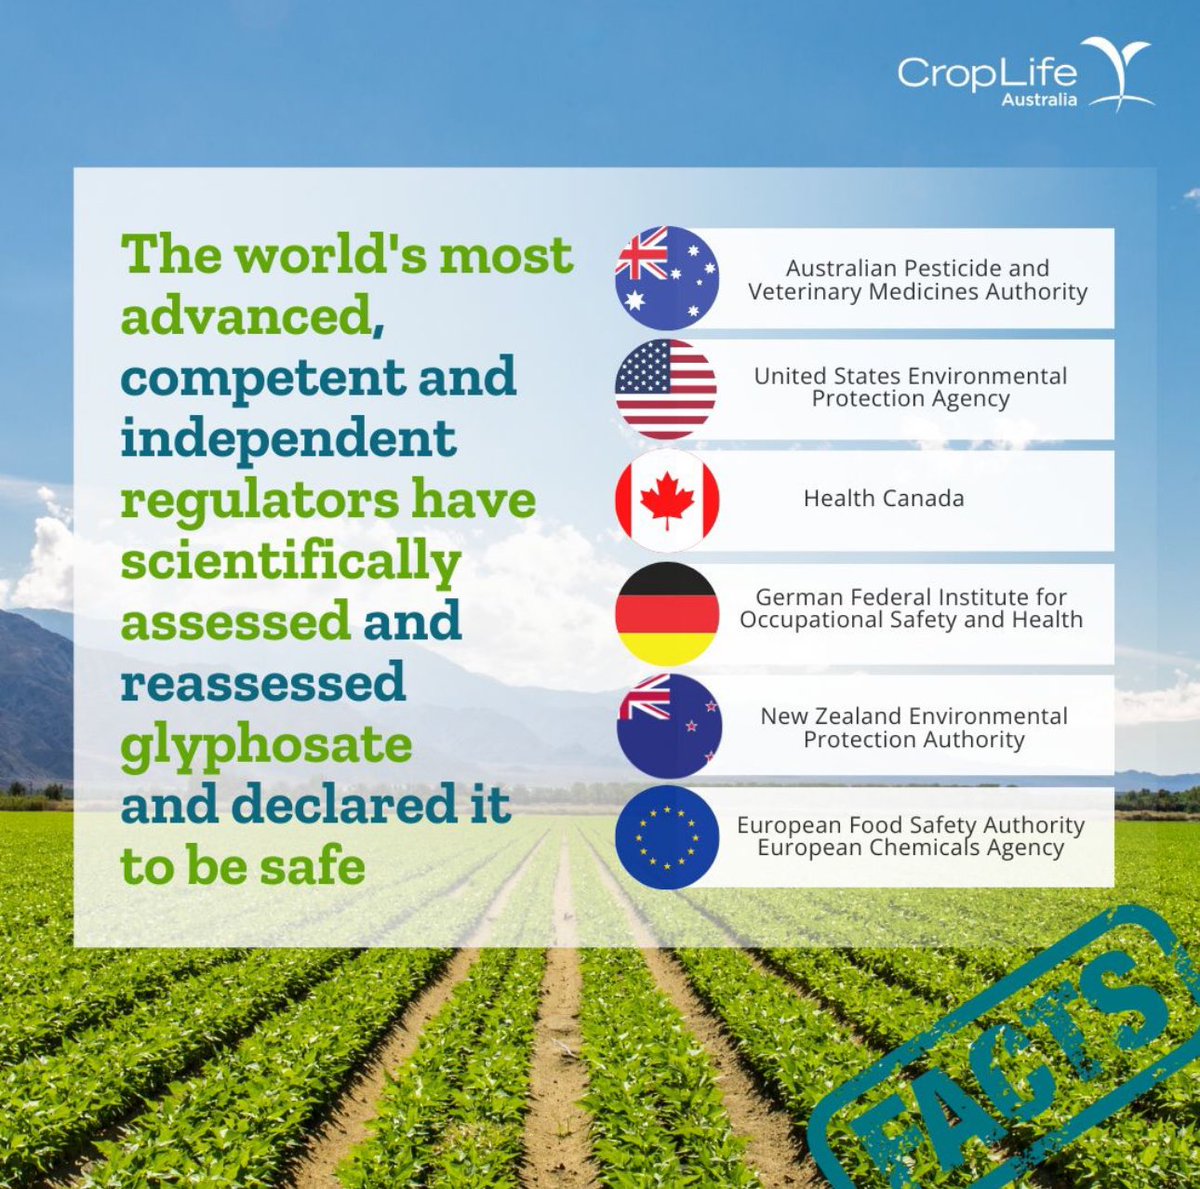 Over 800 scientific studies and independent regulatory safety assessments support the fact that glyphosate does not cause cancer or environmental harm.

Facts and science must prevail.
 
Research confirms glyphosate-based products are safe.